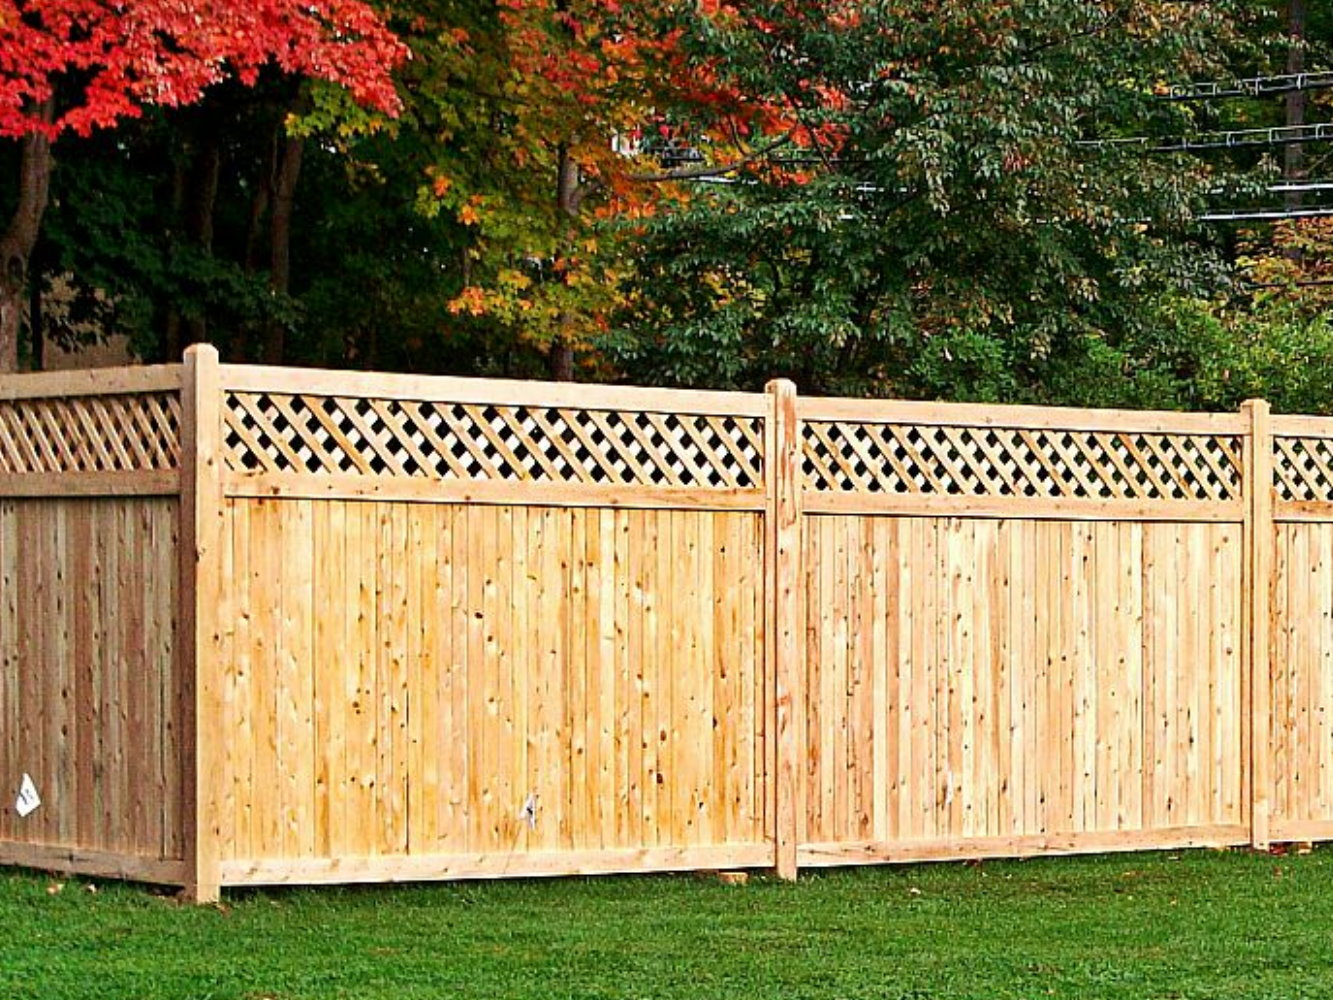 Dobbs Ferry New York residential fencing company